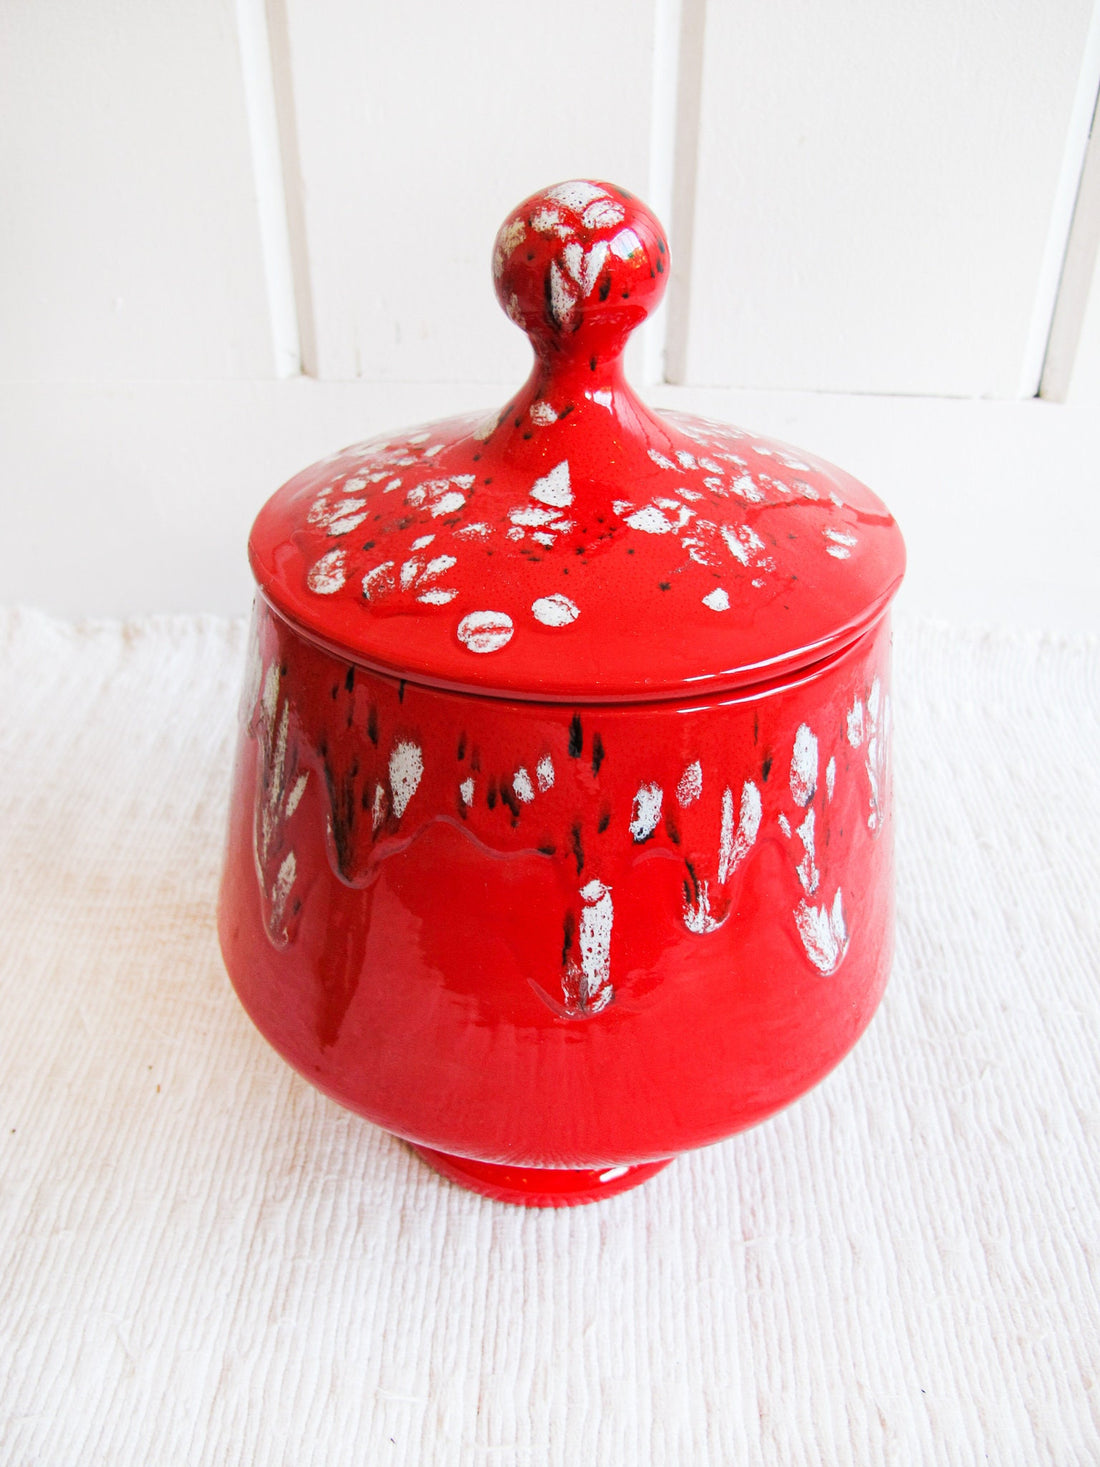 Volcano Cookie Jar With Lid Drip Glaze Red with Black and White Speckled Made in the USA